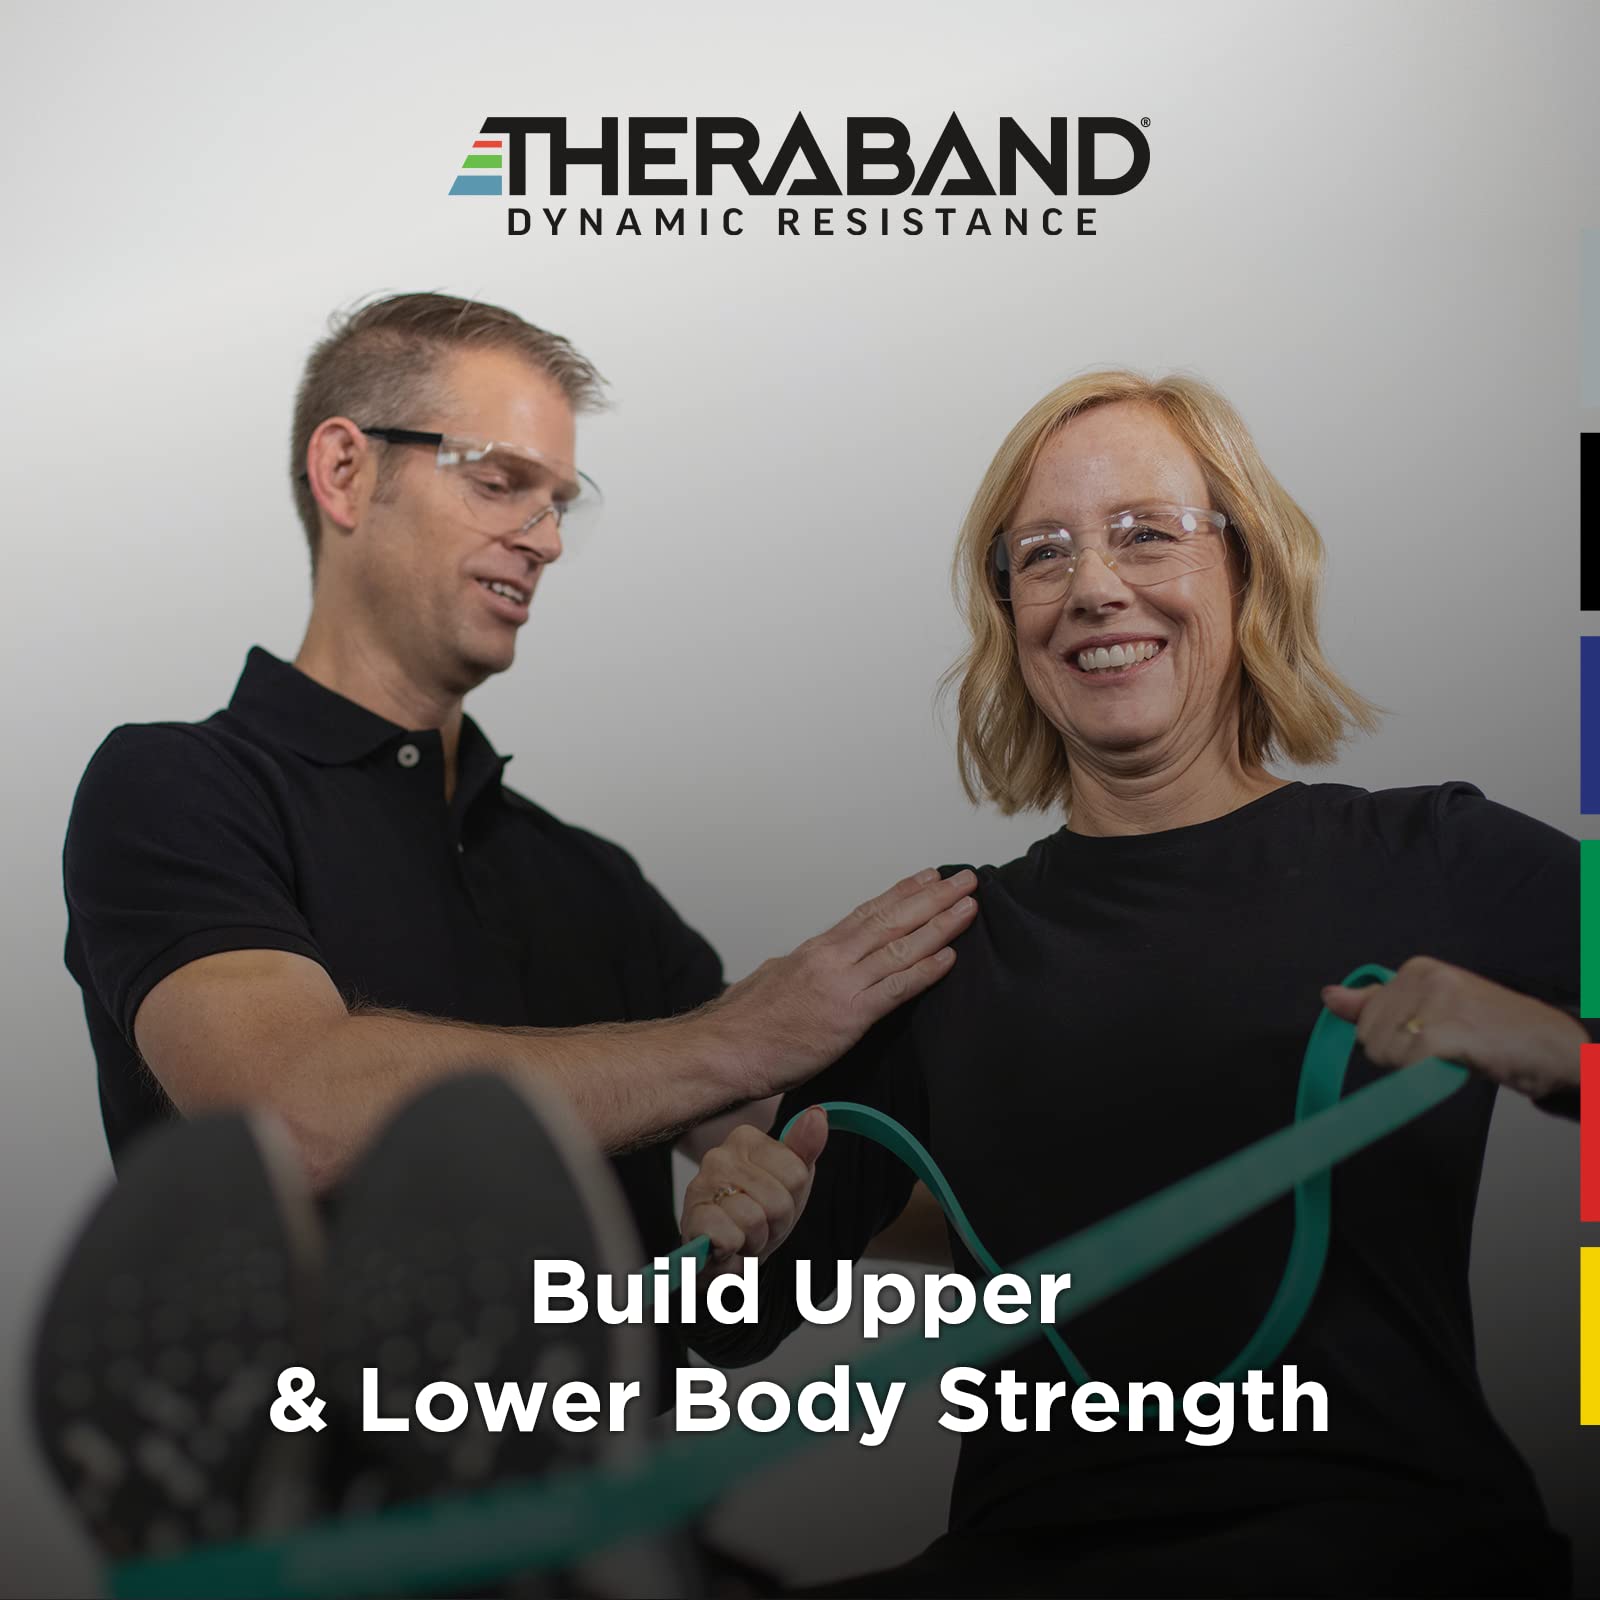 THERABAND High Resistance Bands, Set of 2 Elastic Super Bands for Improving Flexibility, Injury Rehab, & Full Body Workouts, Heavy Duty Stretch Bands for Lifting